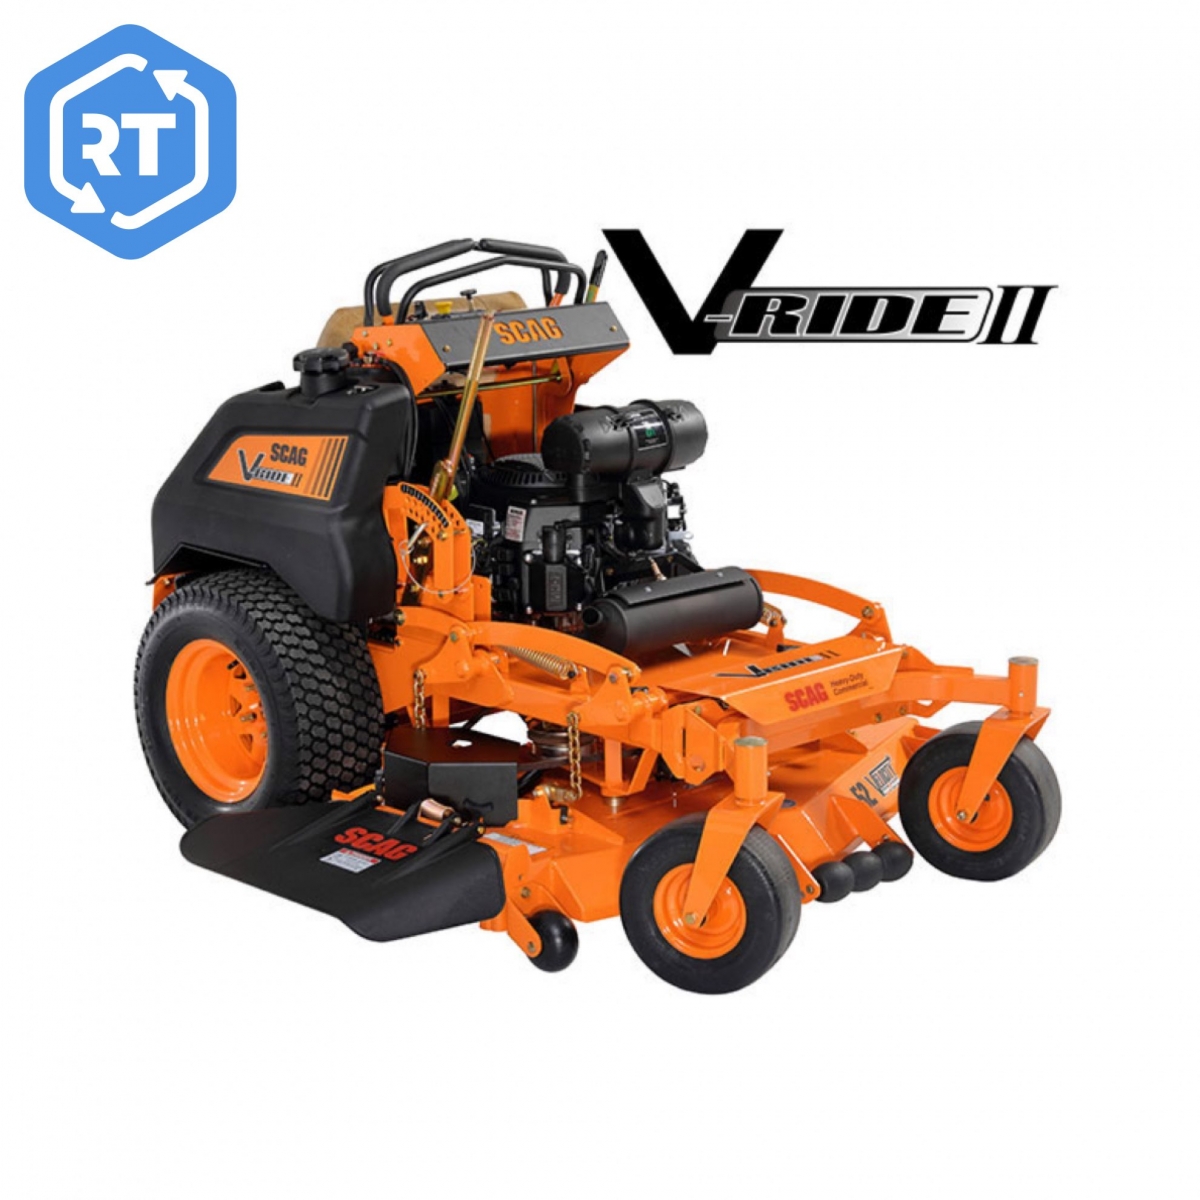 Scag V-Ride II 48" Stand-on Mower